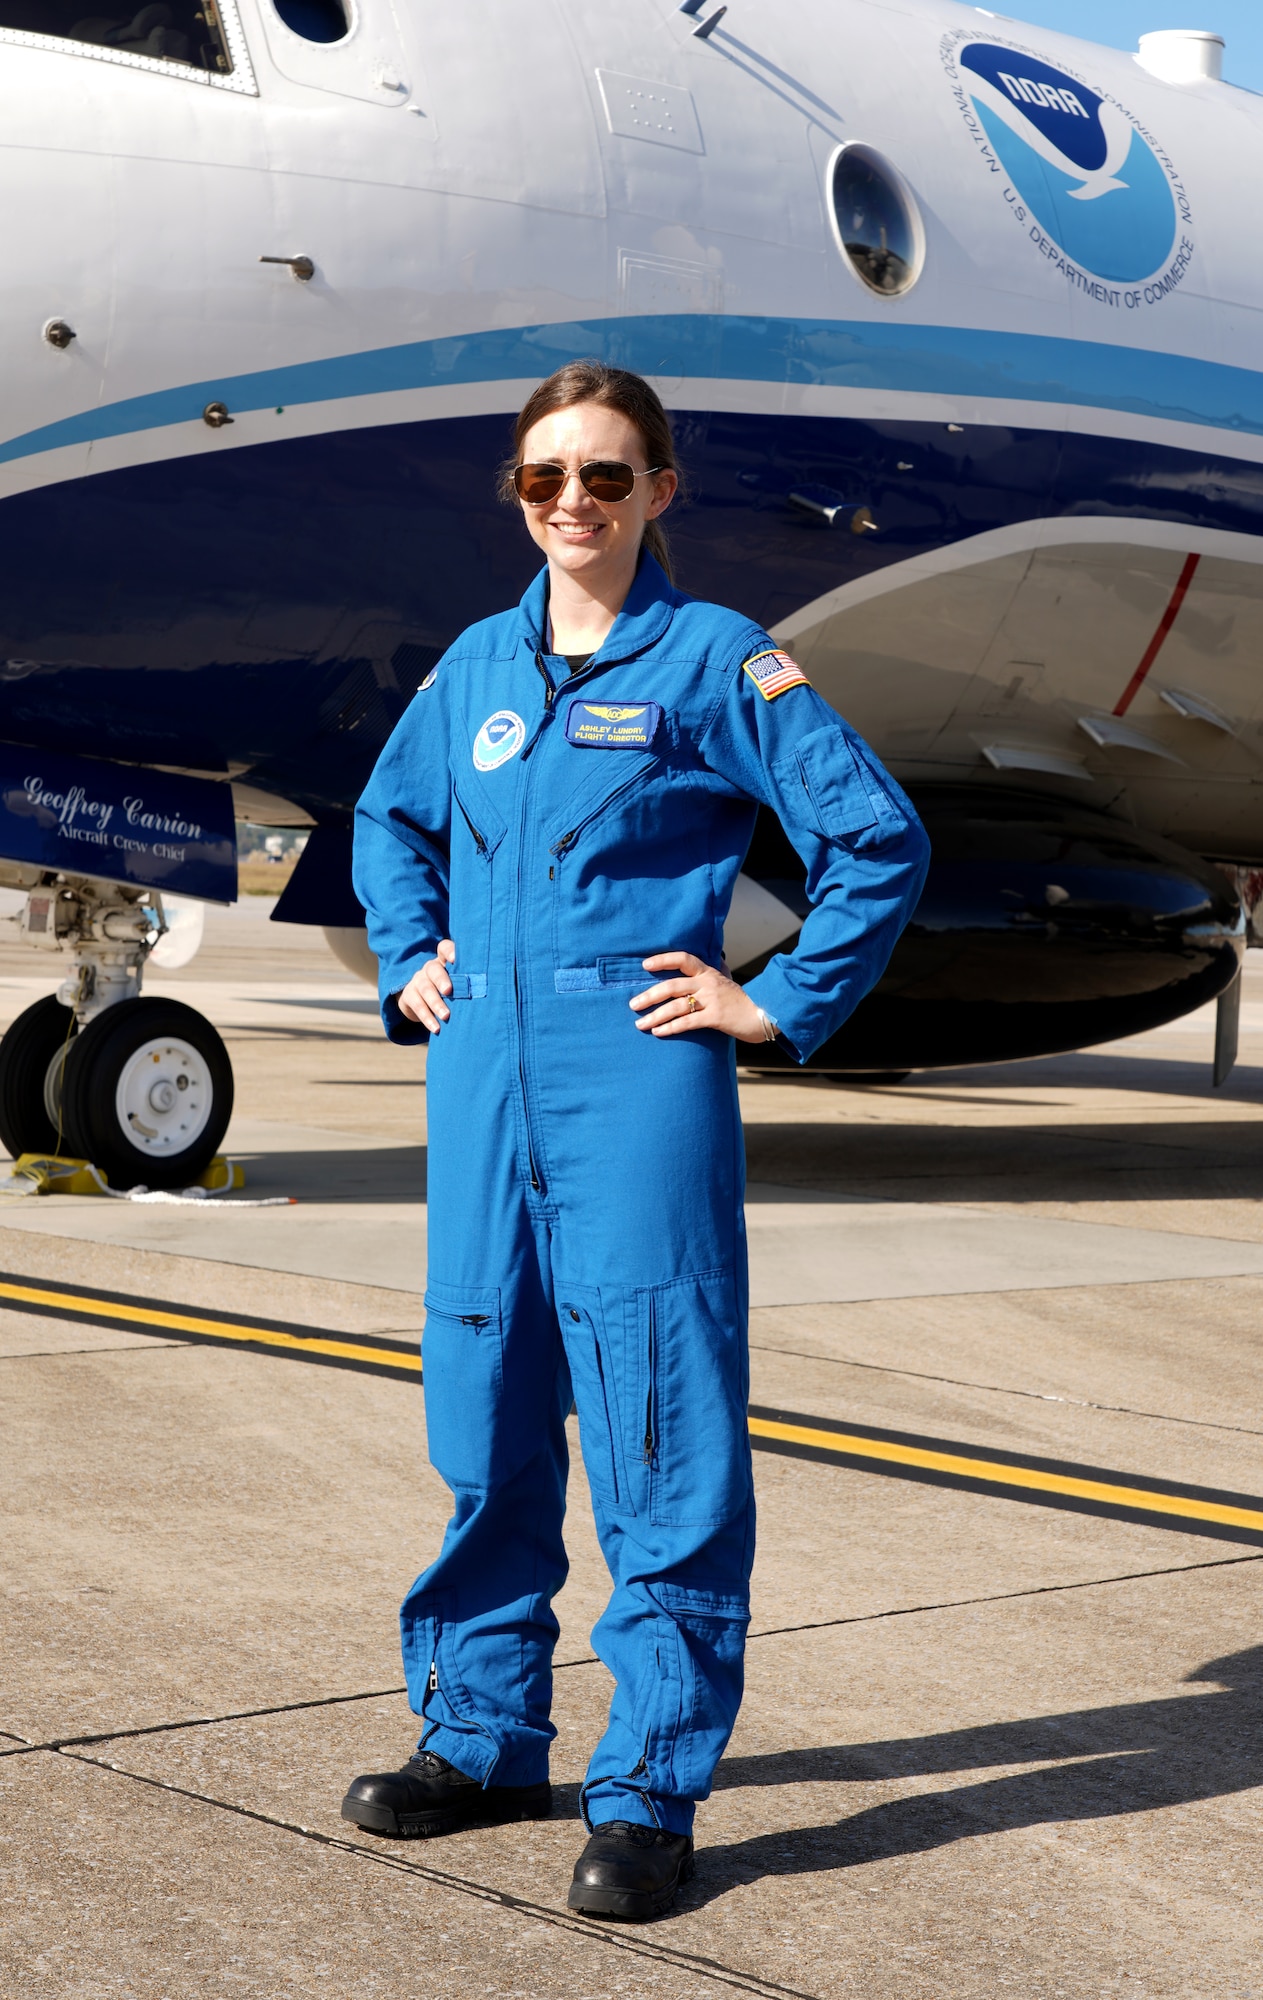 Ashley Lundry, a flight director for the National Oceanic and Atmospheric Administration Hurricane Hunters in Lakeland Fla., stands in front of a Lockheed WP-3D Orion at Keesler Air Force Base, Miss., Nov. 13, 2019. Lundry is also an aerial reconnaissance weather officer for the Air Force Reserve's 53rd Weather Reconnaissance Squadron "Hurricane Hunters." (U.S. Air Force photo by Senior Airman Kristen Pittman)